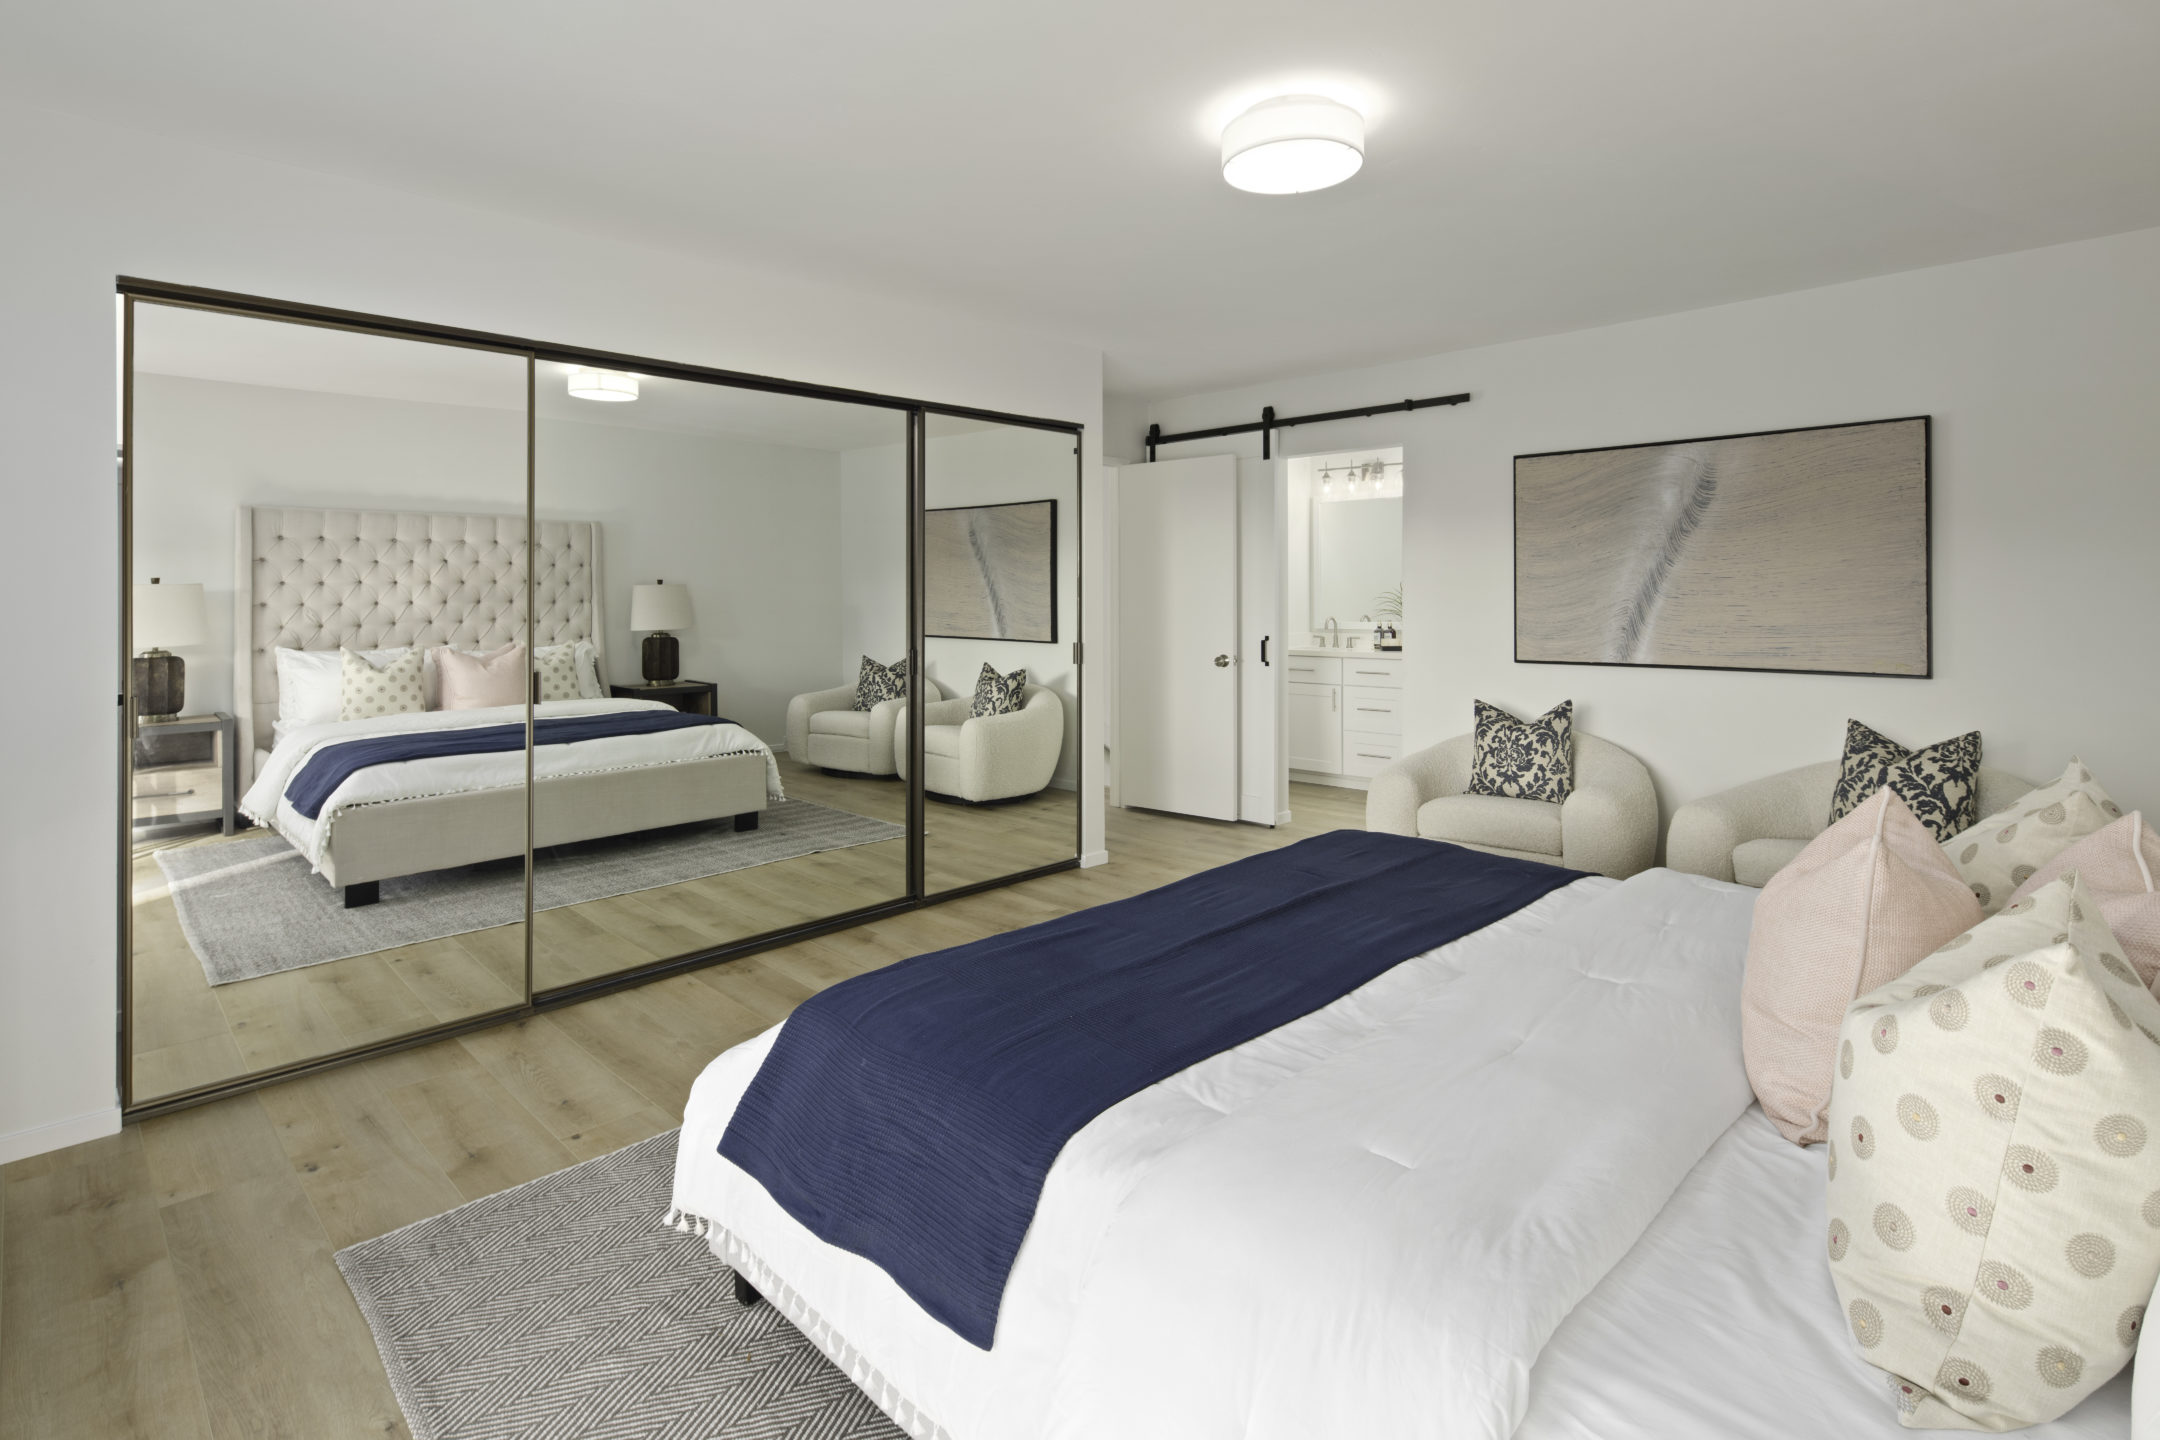 modern bedroom design updates sell homes successfully